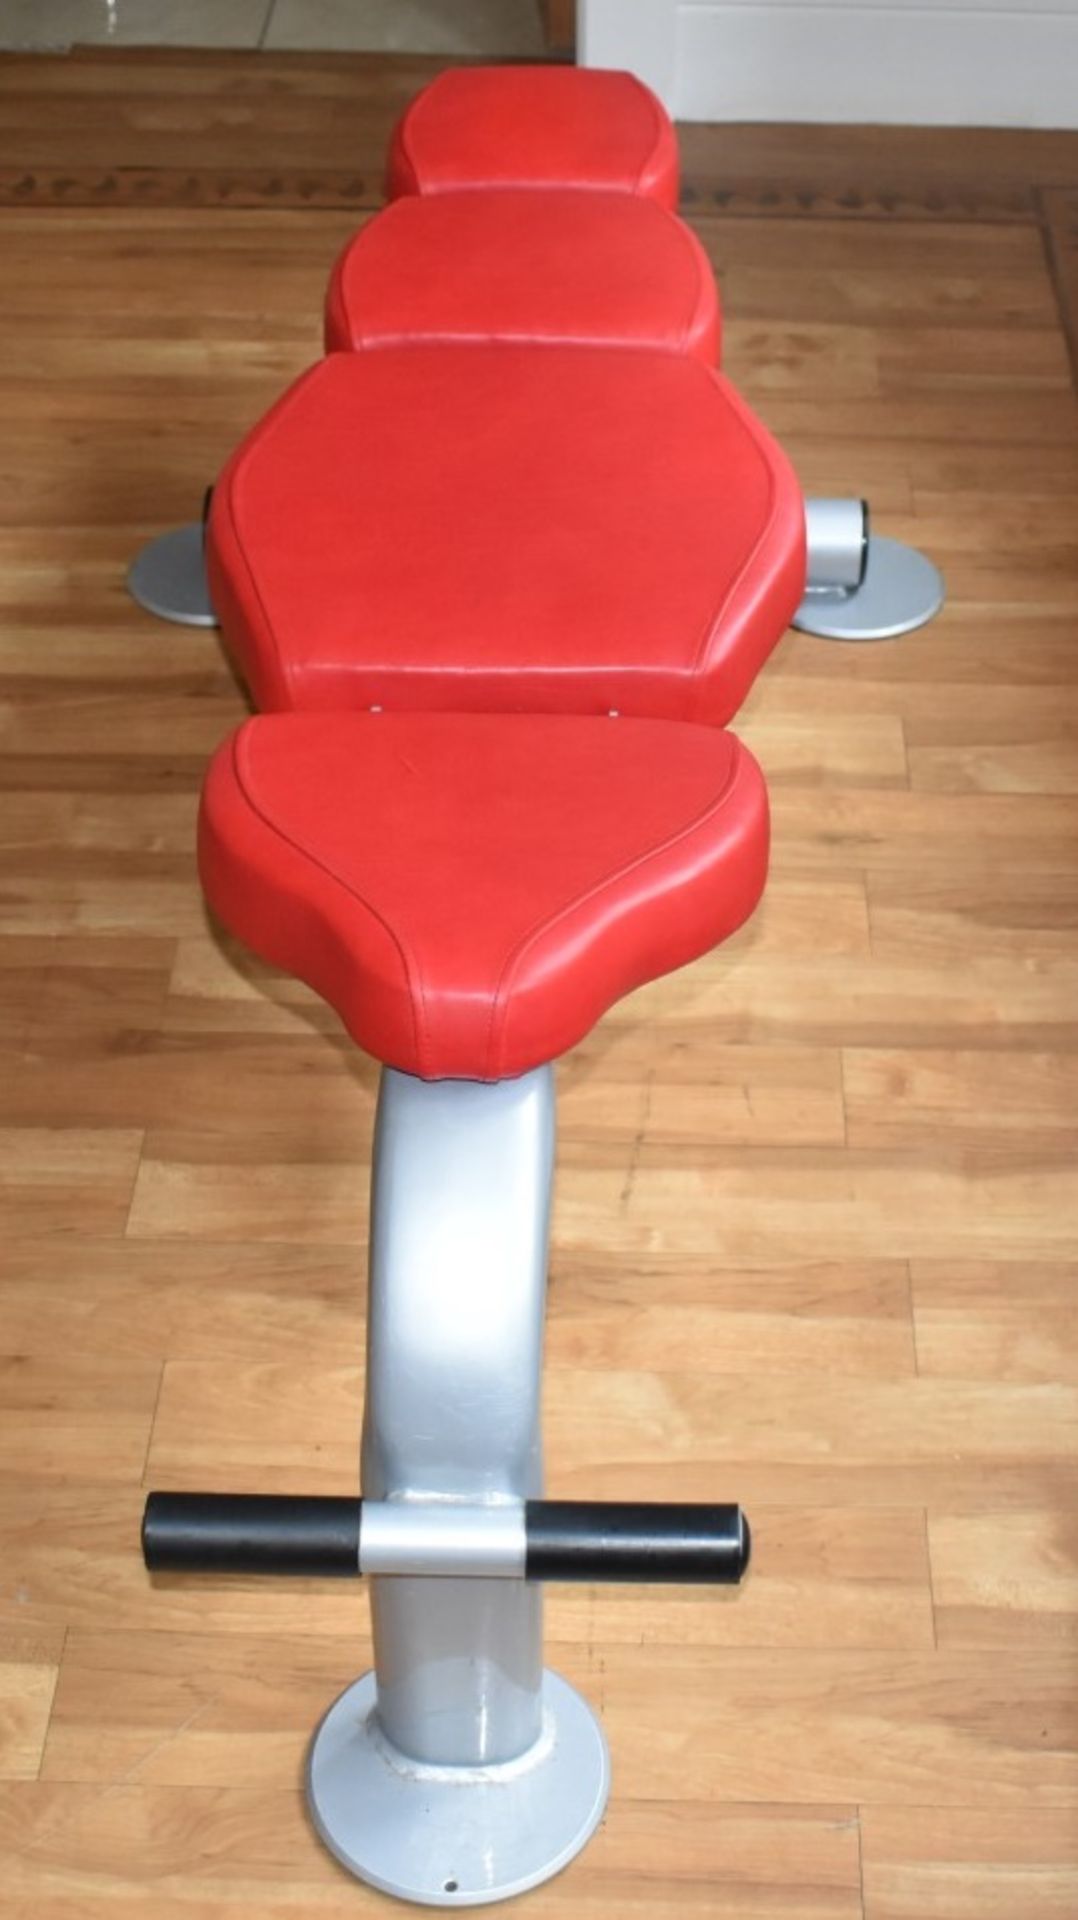 1 x Escape Fitness Adjustable Gym Bench - CL546 - Location: Hale, Cheshire - NO VAT ON THE HAMMER! - Image 2 of 3